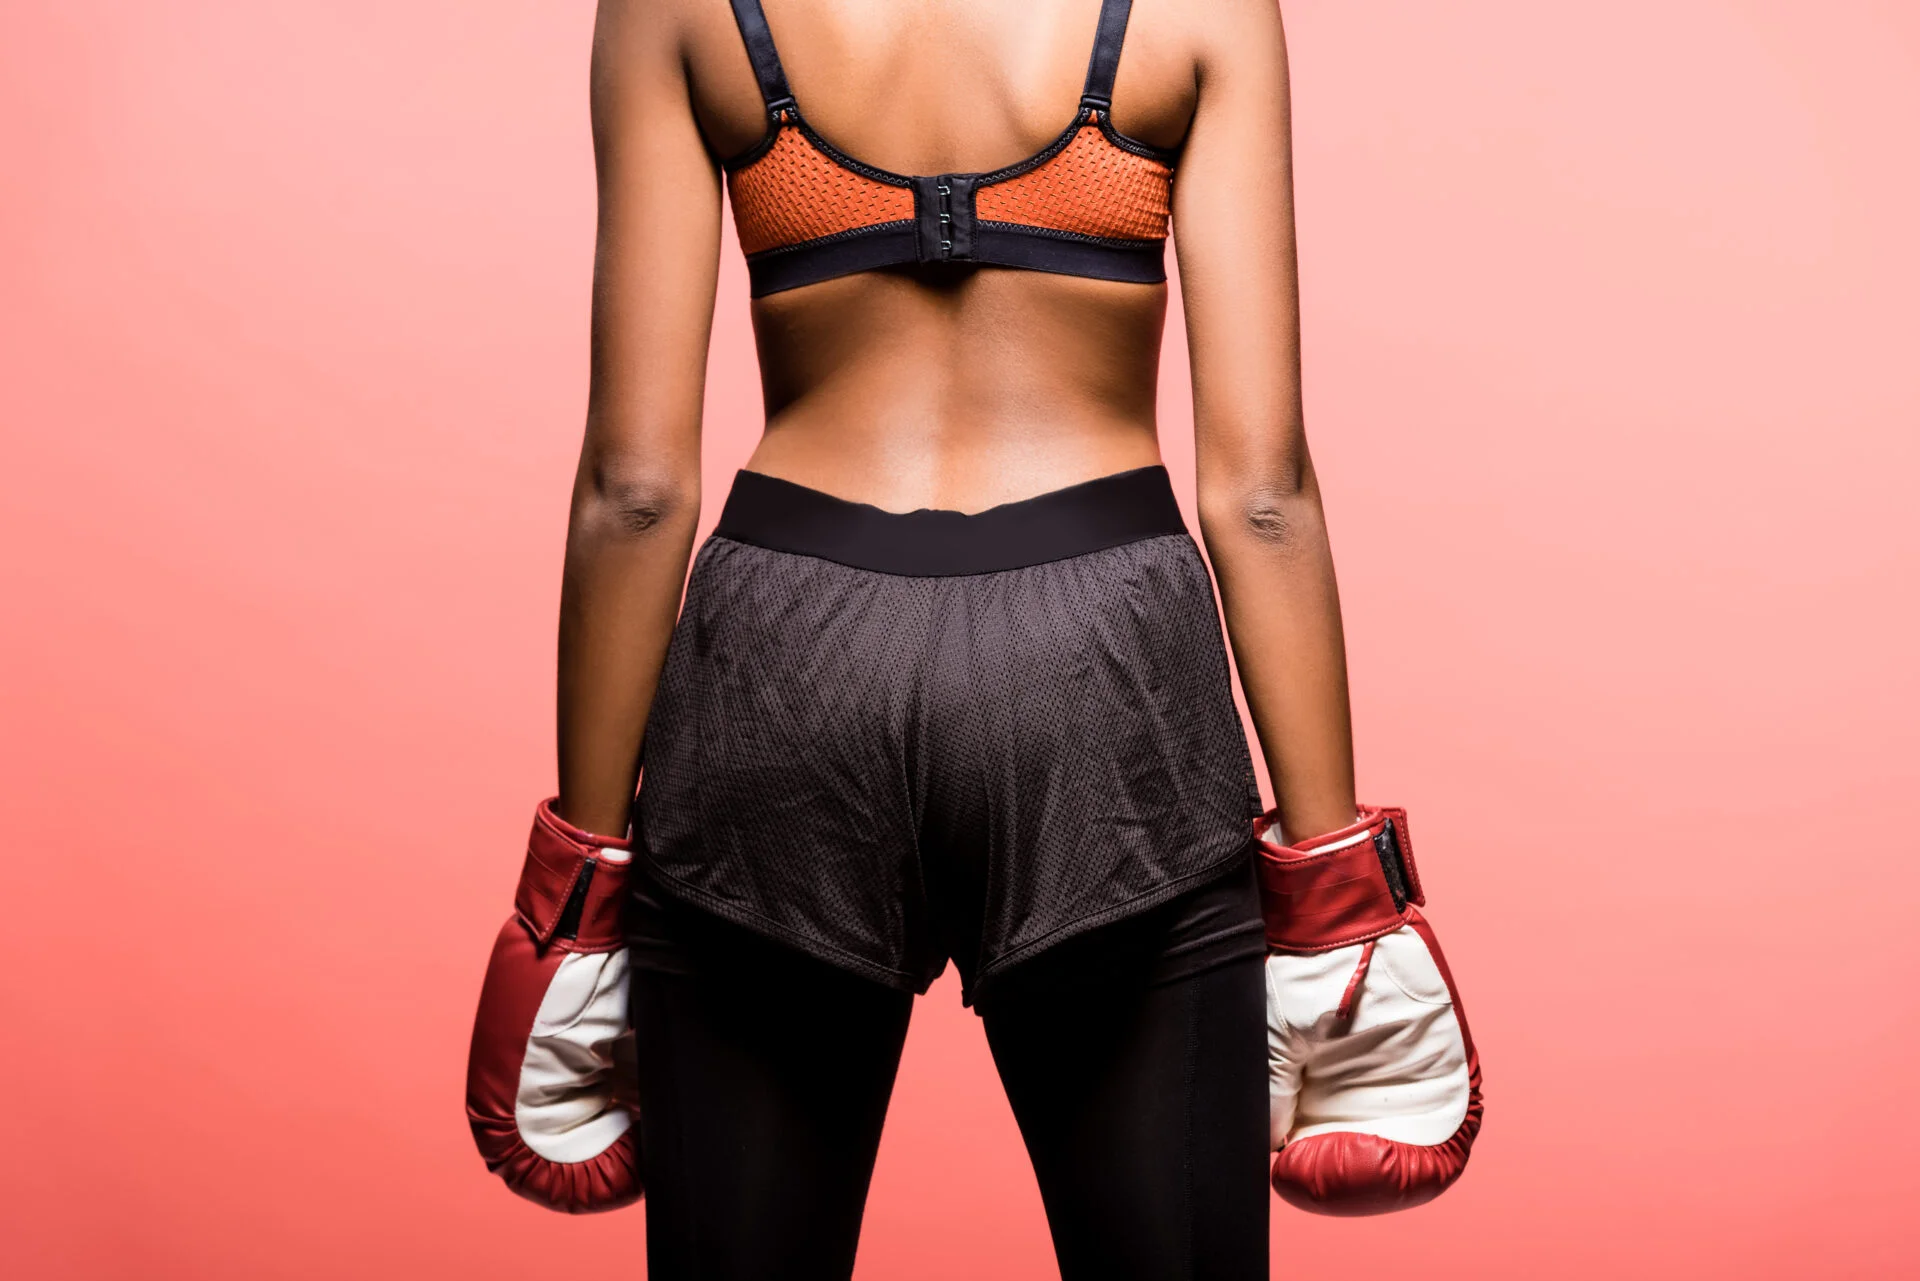 woman wearing sports bras and boxing shorts with boxing gloves